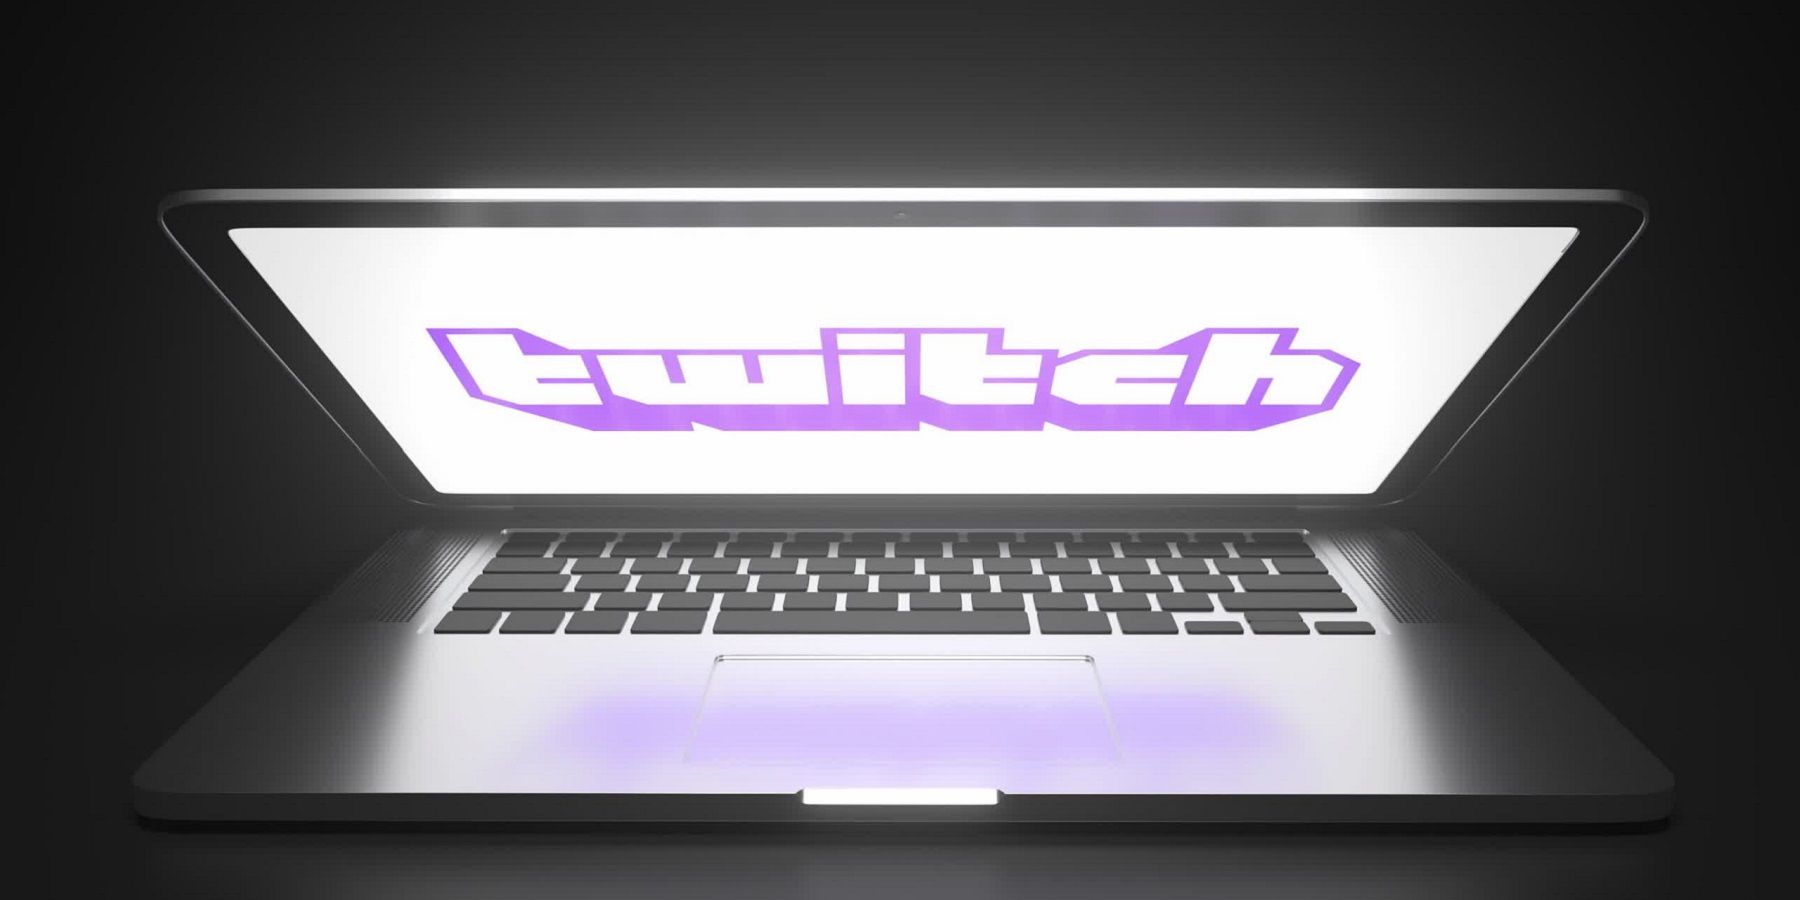 A photo of a half-closed laptop with the Twitch logo on the screen.